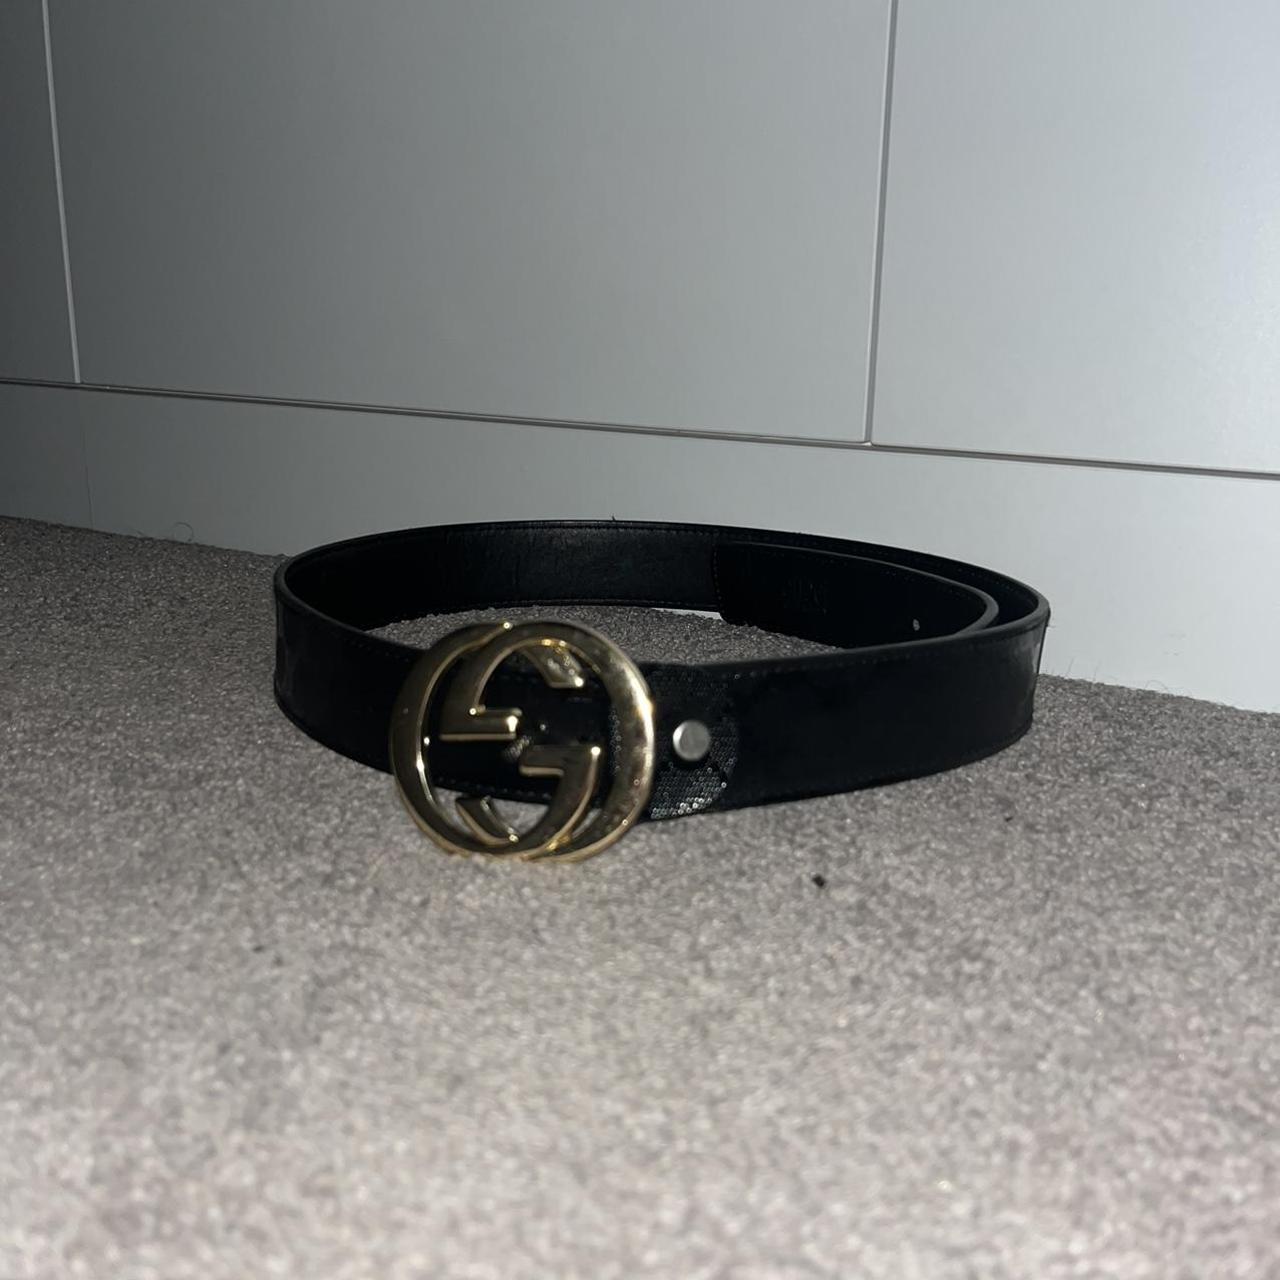 GUCCI BELT‼️ GREAT CONDITION FITS PERFECT💯 MESSAGE... - Depop